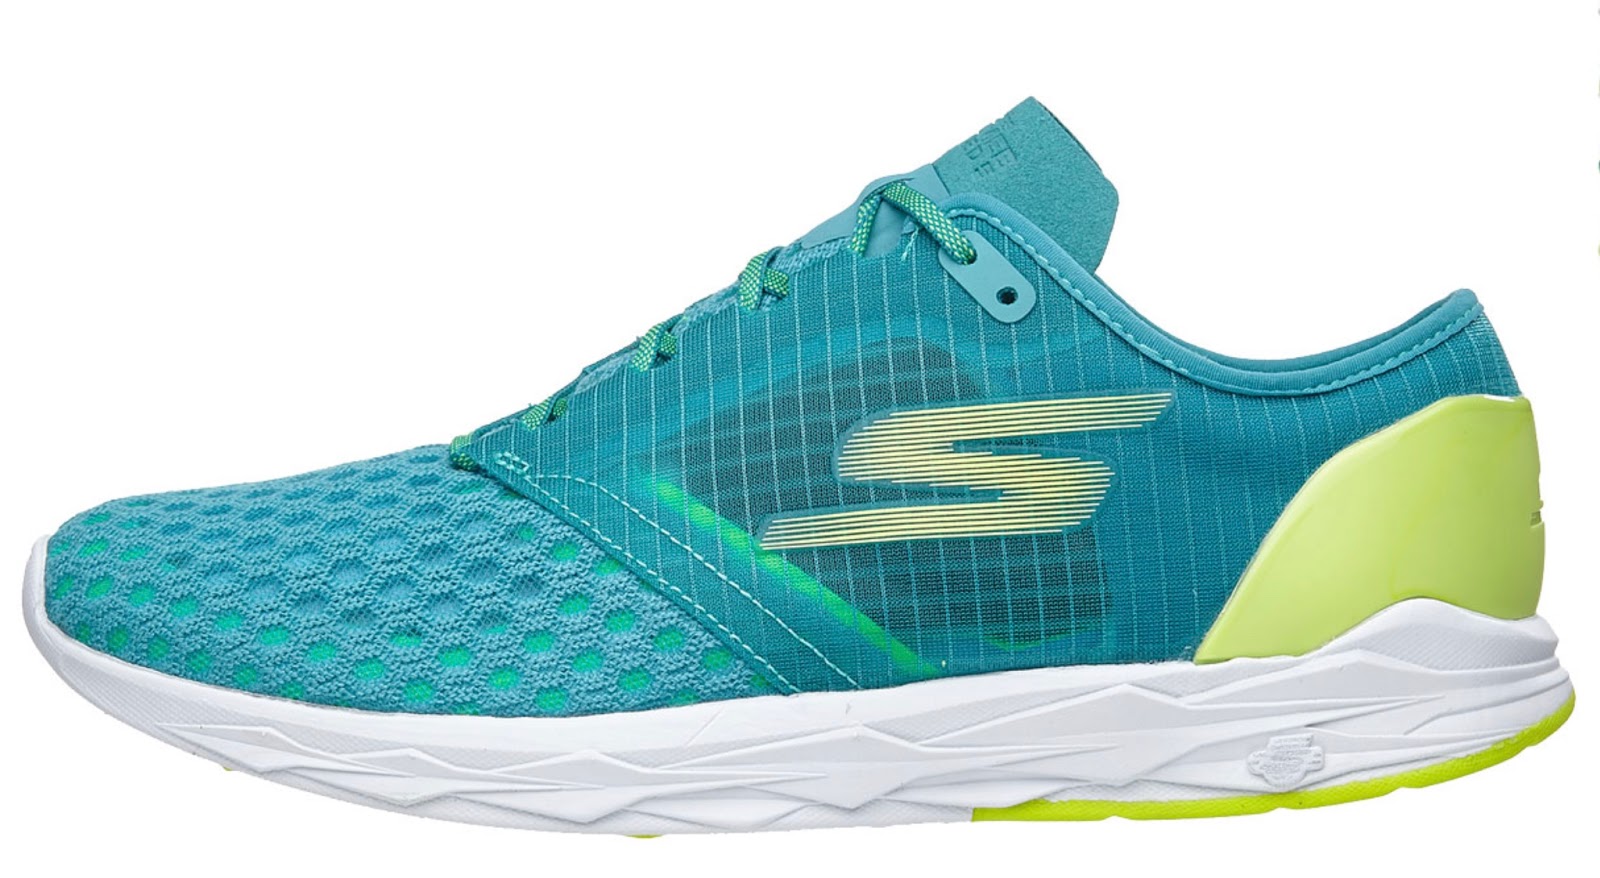 skechers go meb speed 5 review